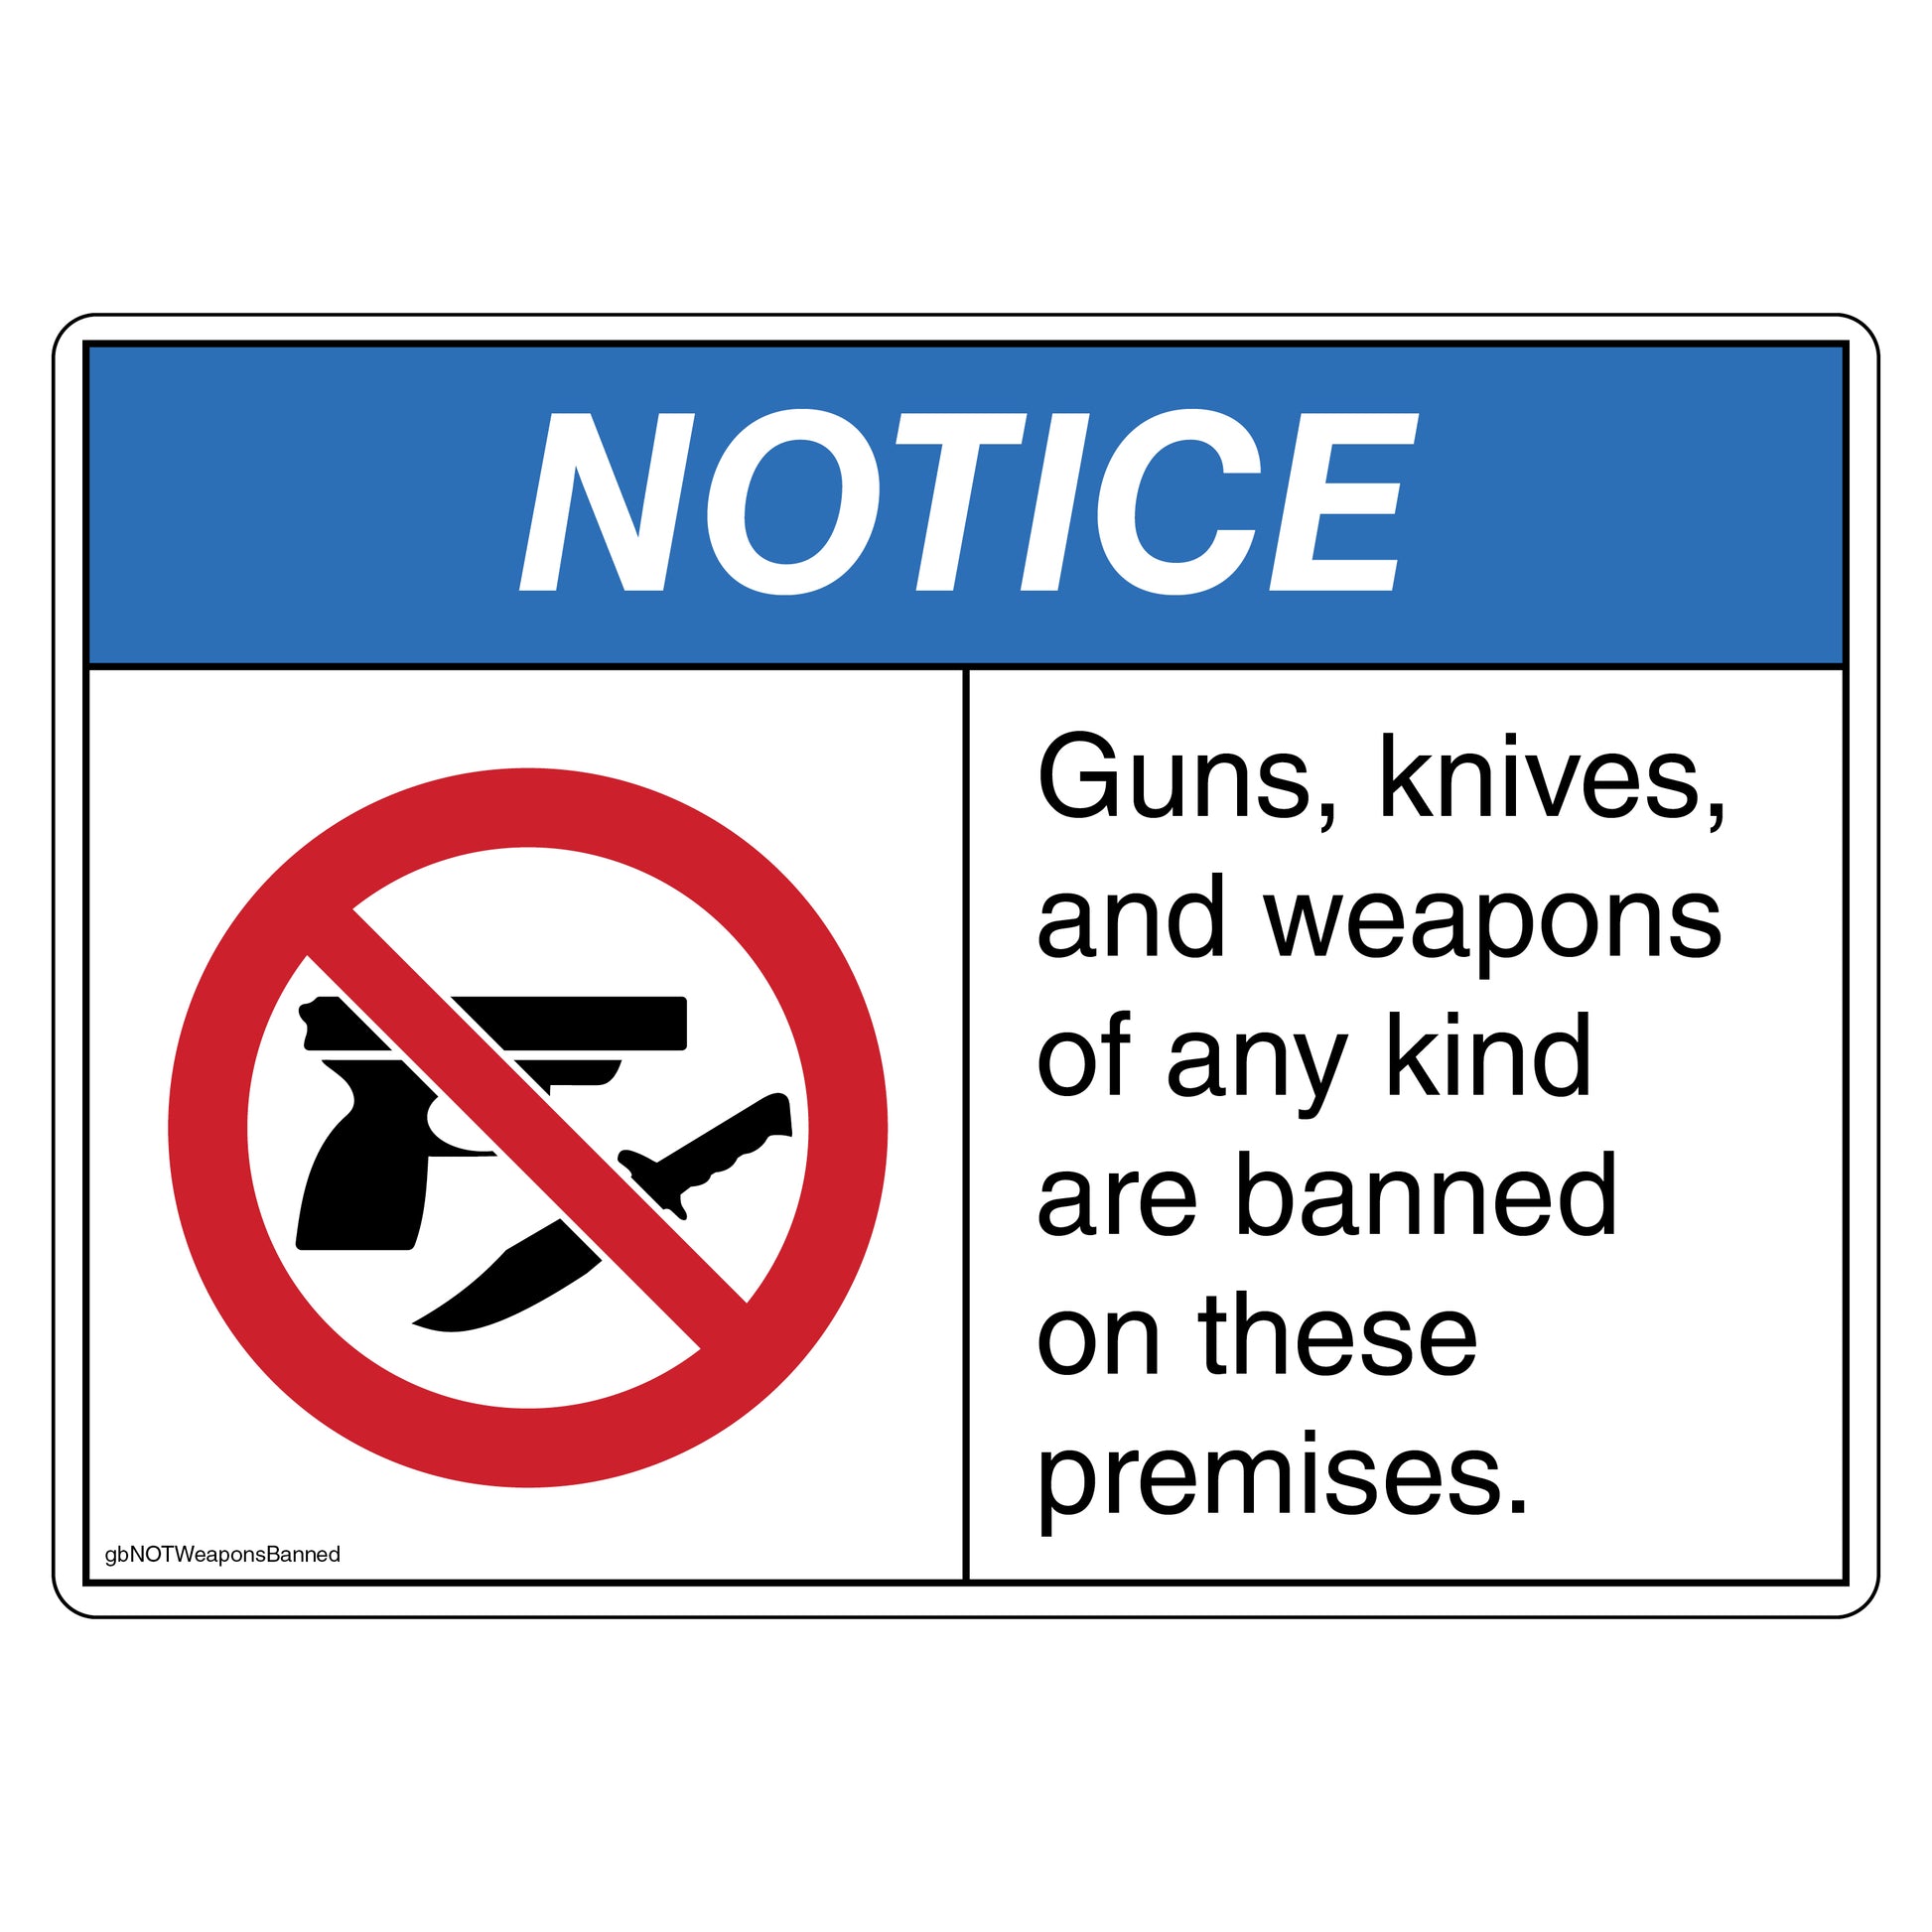 Notice Guns, Knives, and Weapons of Any Kind are Banned on these Premises Decal.